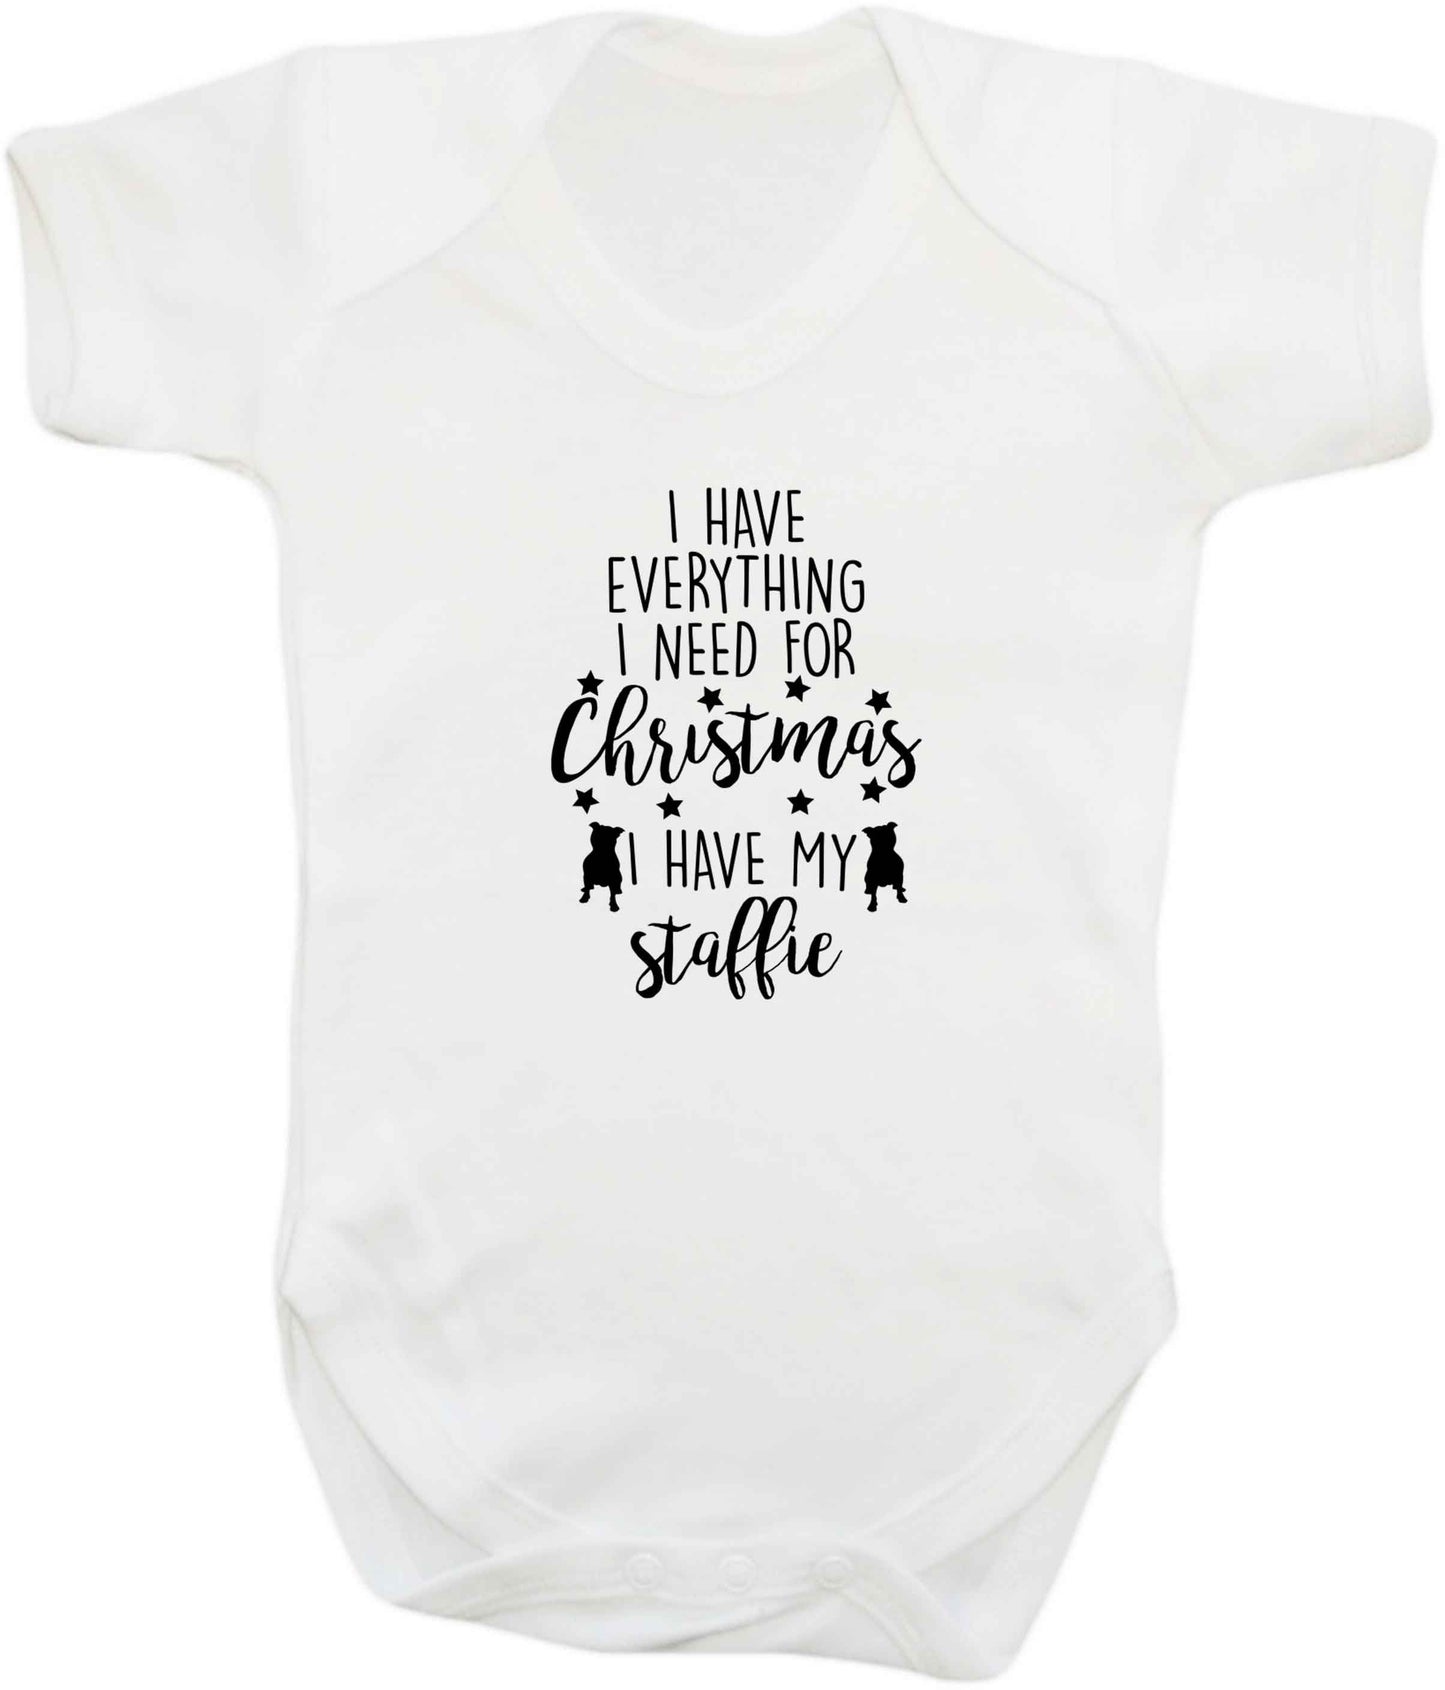 I have everything I need for Christmas I have my staffie baby vest white 18-24 months